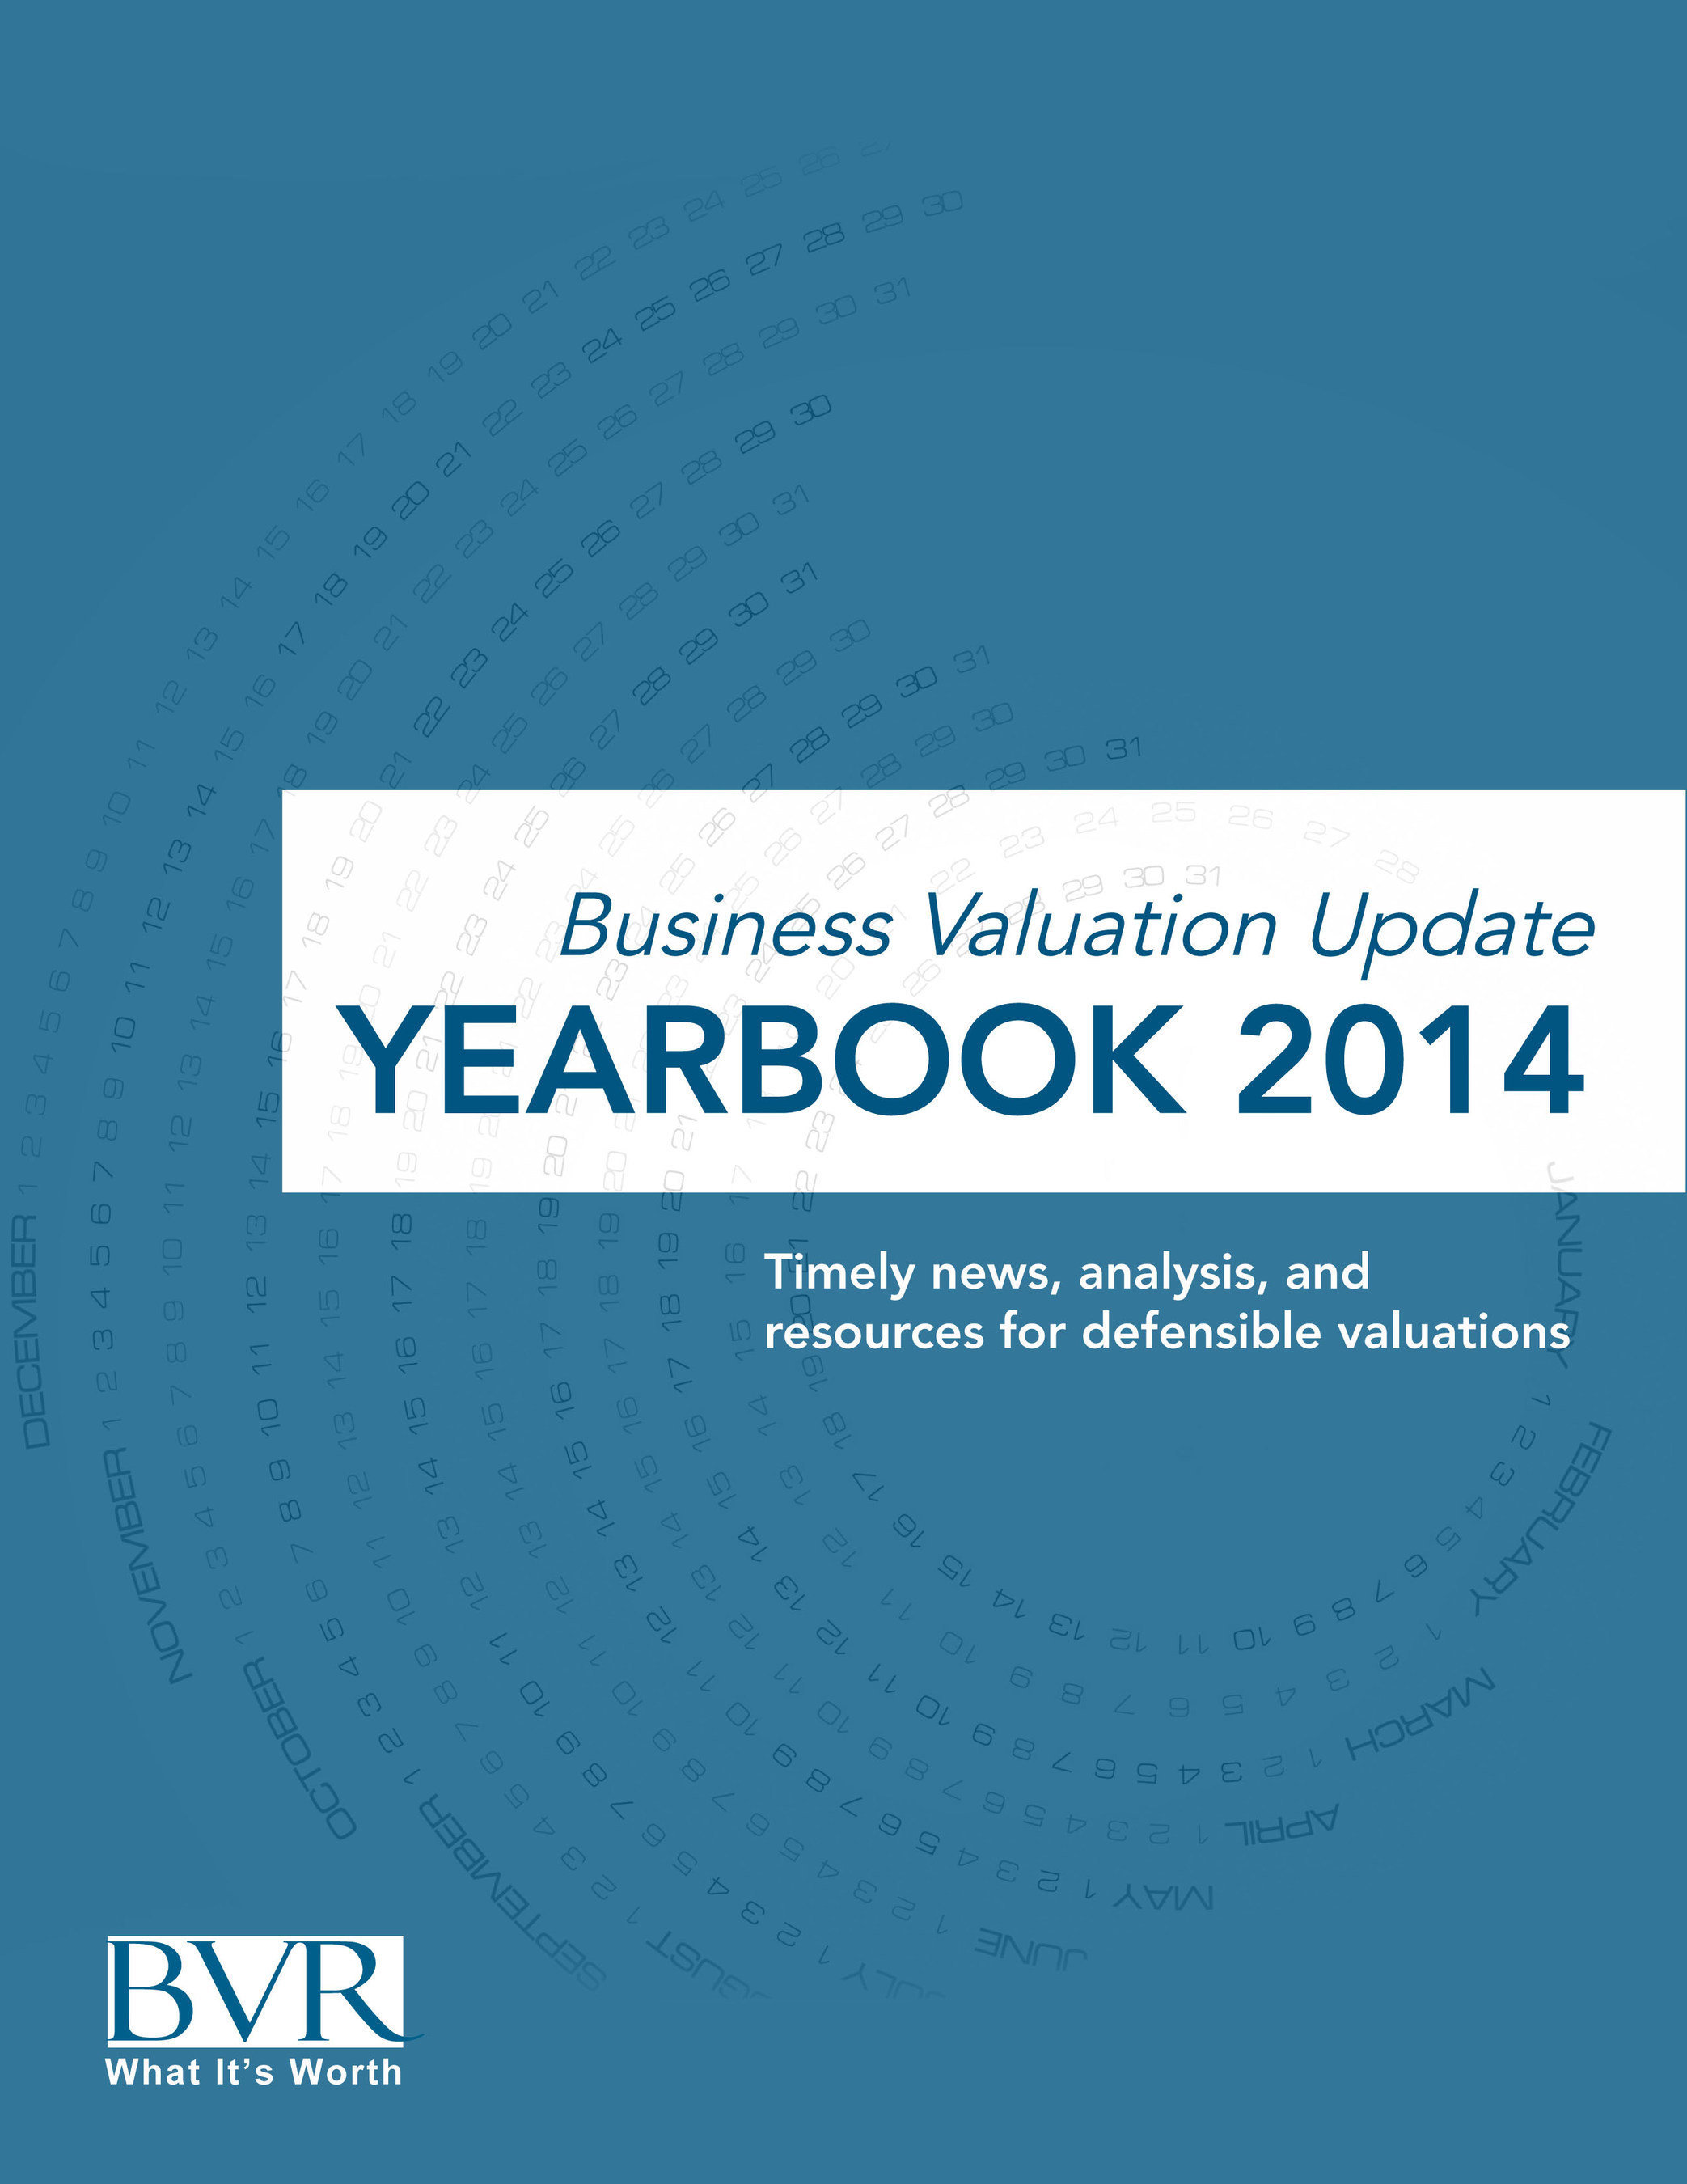 Business Valuation Update Yearbook 2014 (PRNewsFoto/Business Valuation Resources)